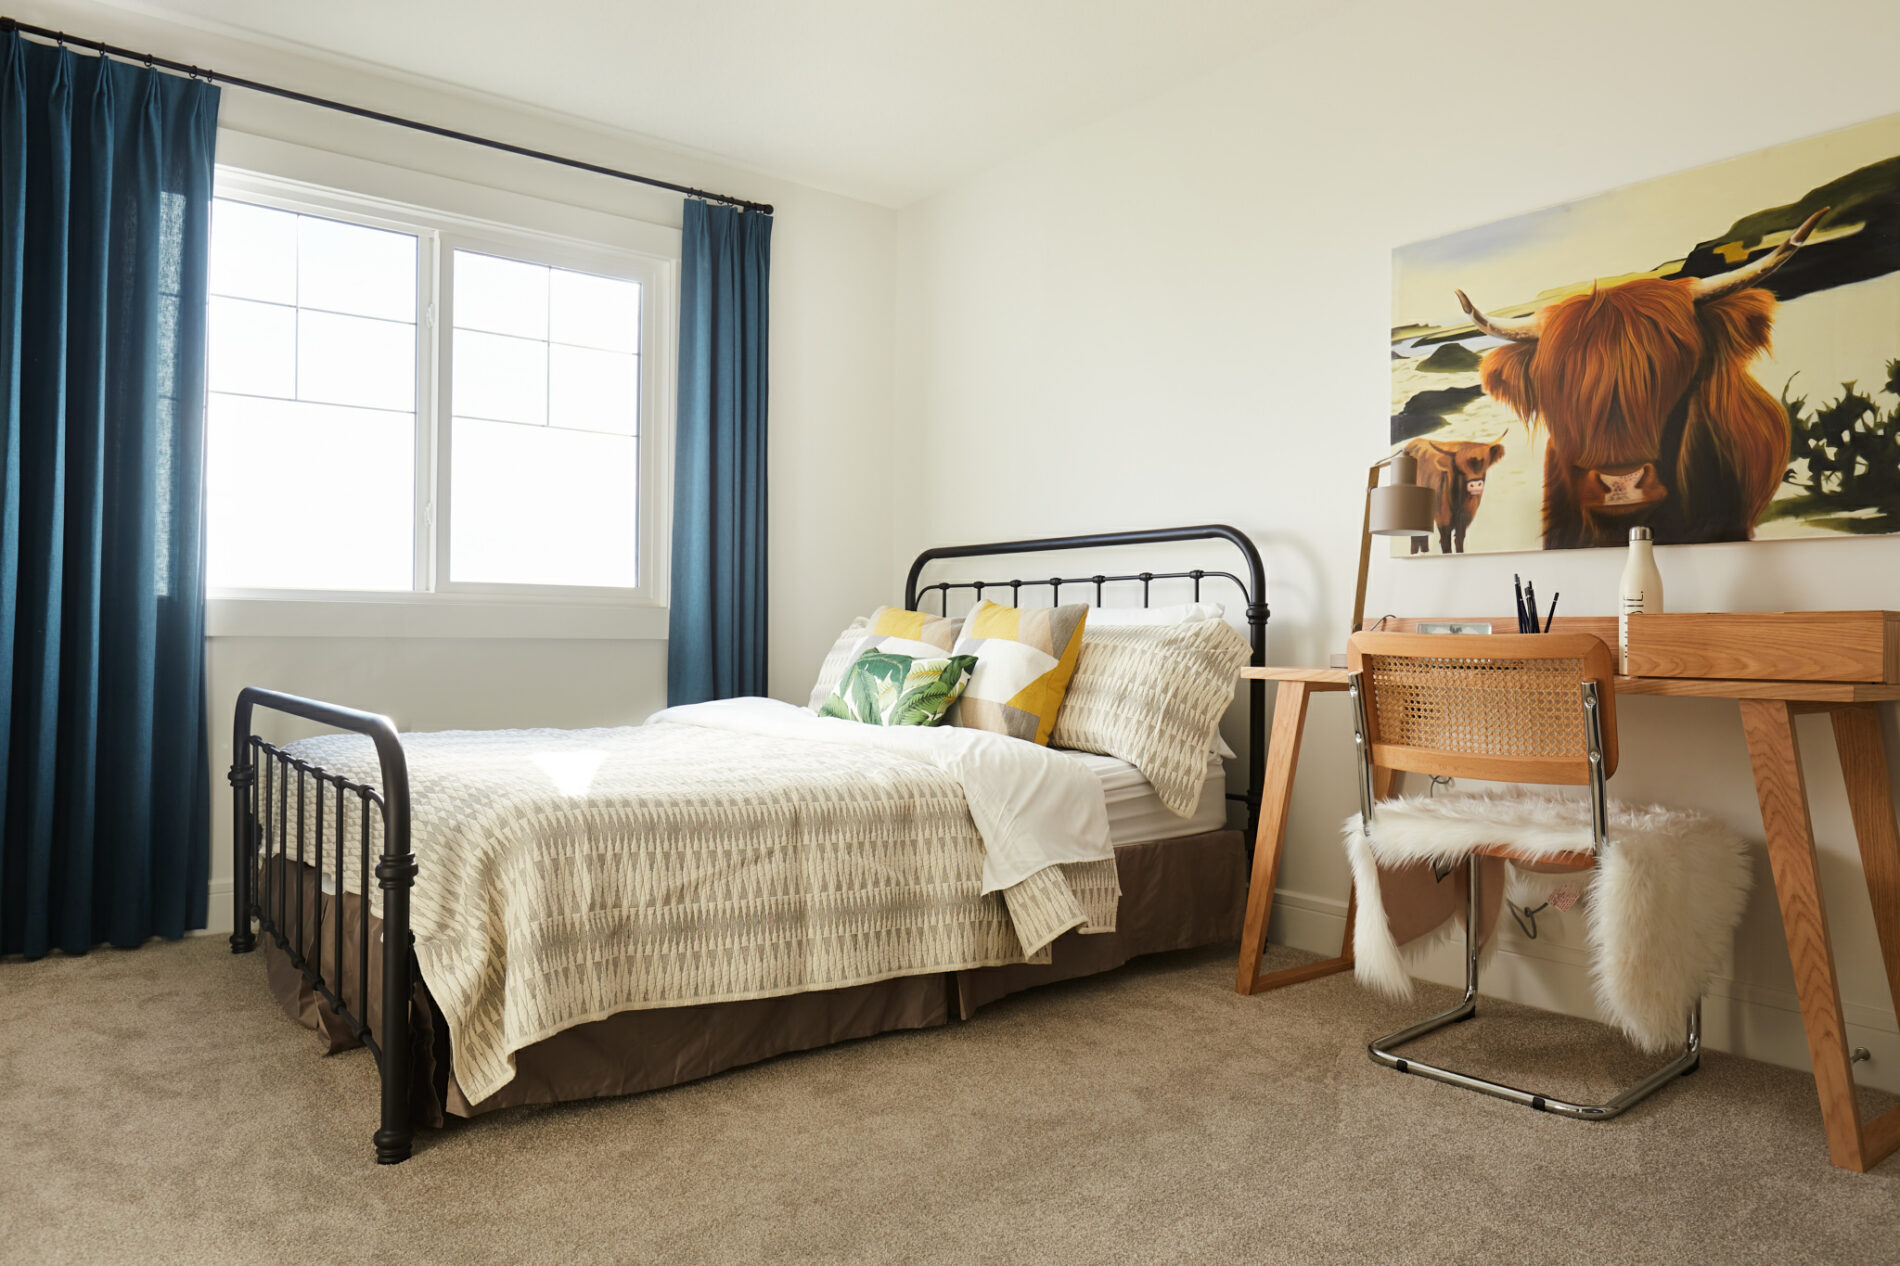 A gender neutral secondary bedroom with large window, wrought iron bed with rustic bedding, wood desk and chair and large highland cow art